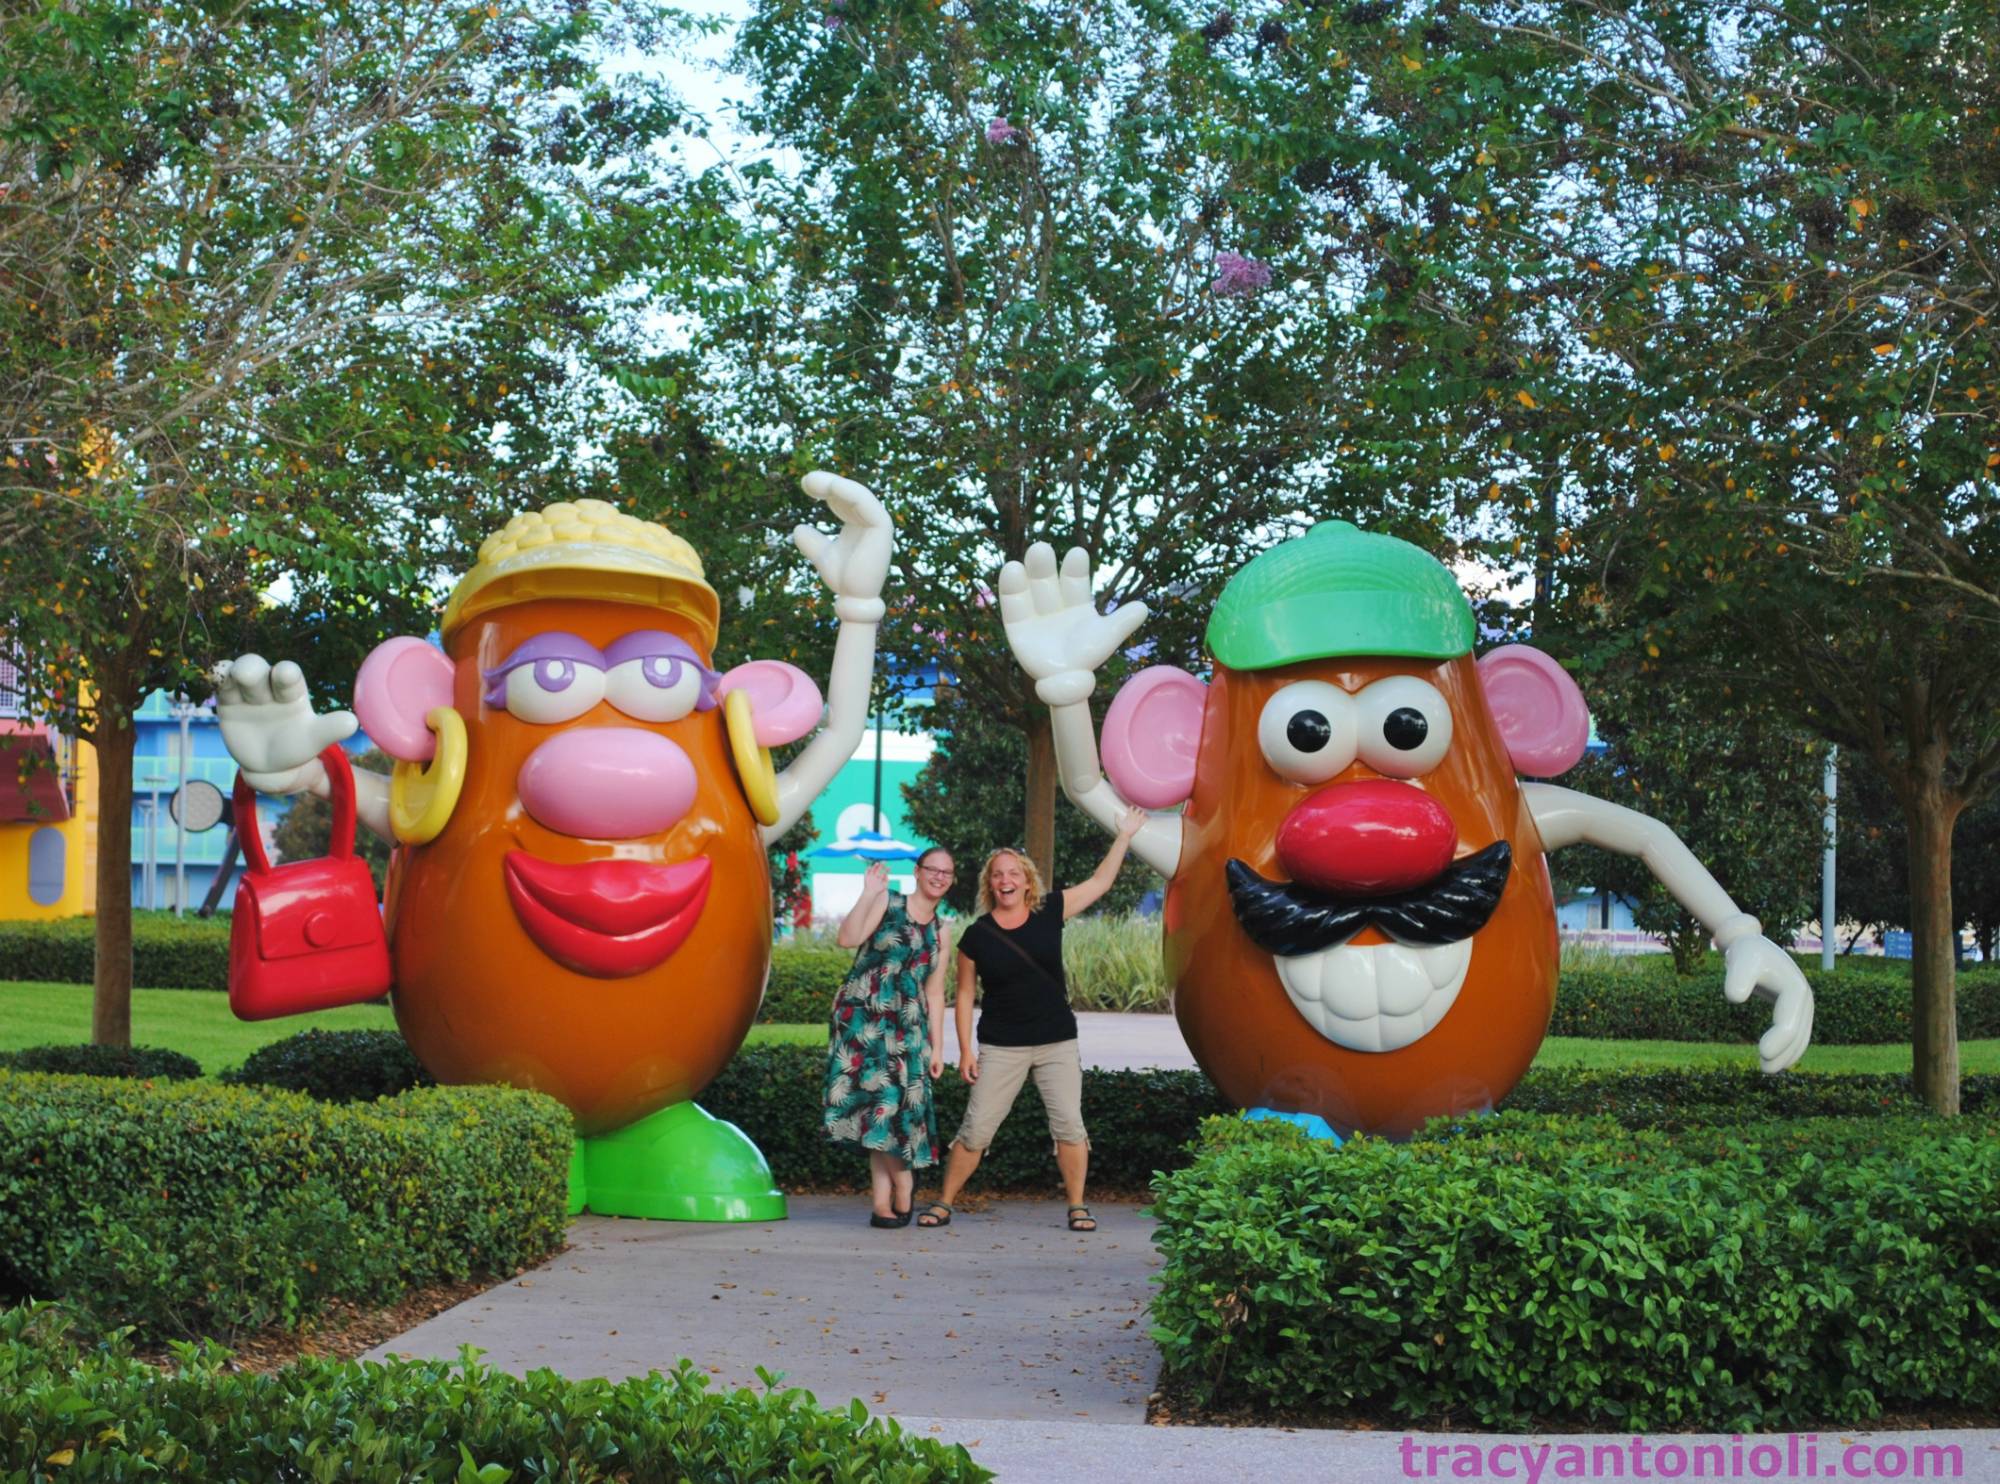 Learn more about Walt Disney World and yourself when you travel with a friend | PassPorter.com